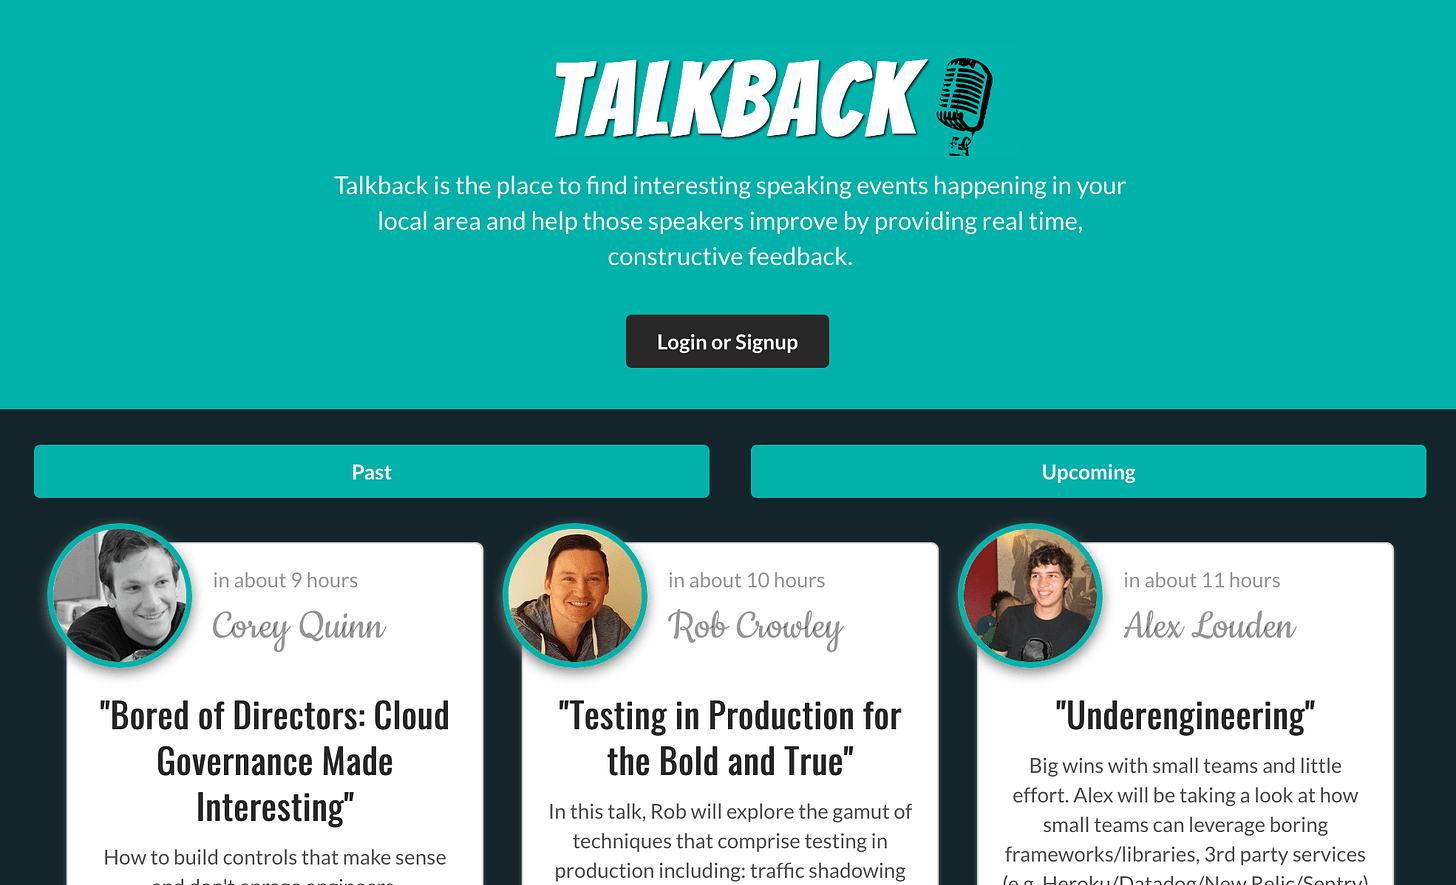 A cyan background with a drawn image of a microphone. The logo of talkback